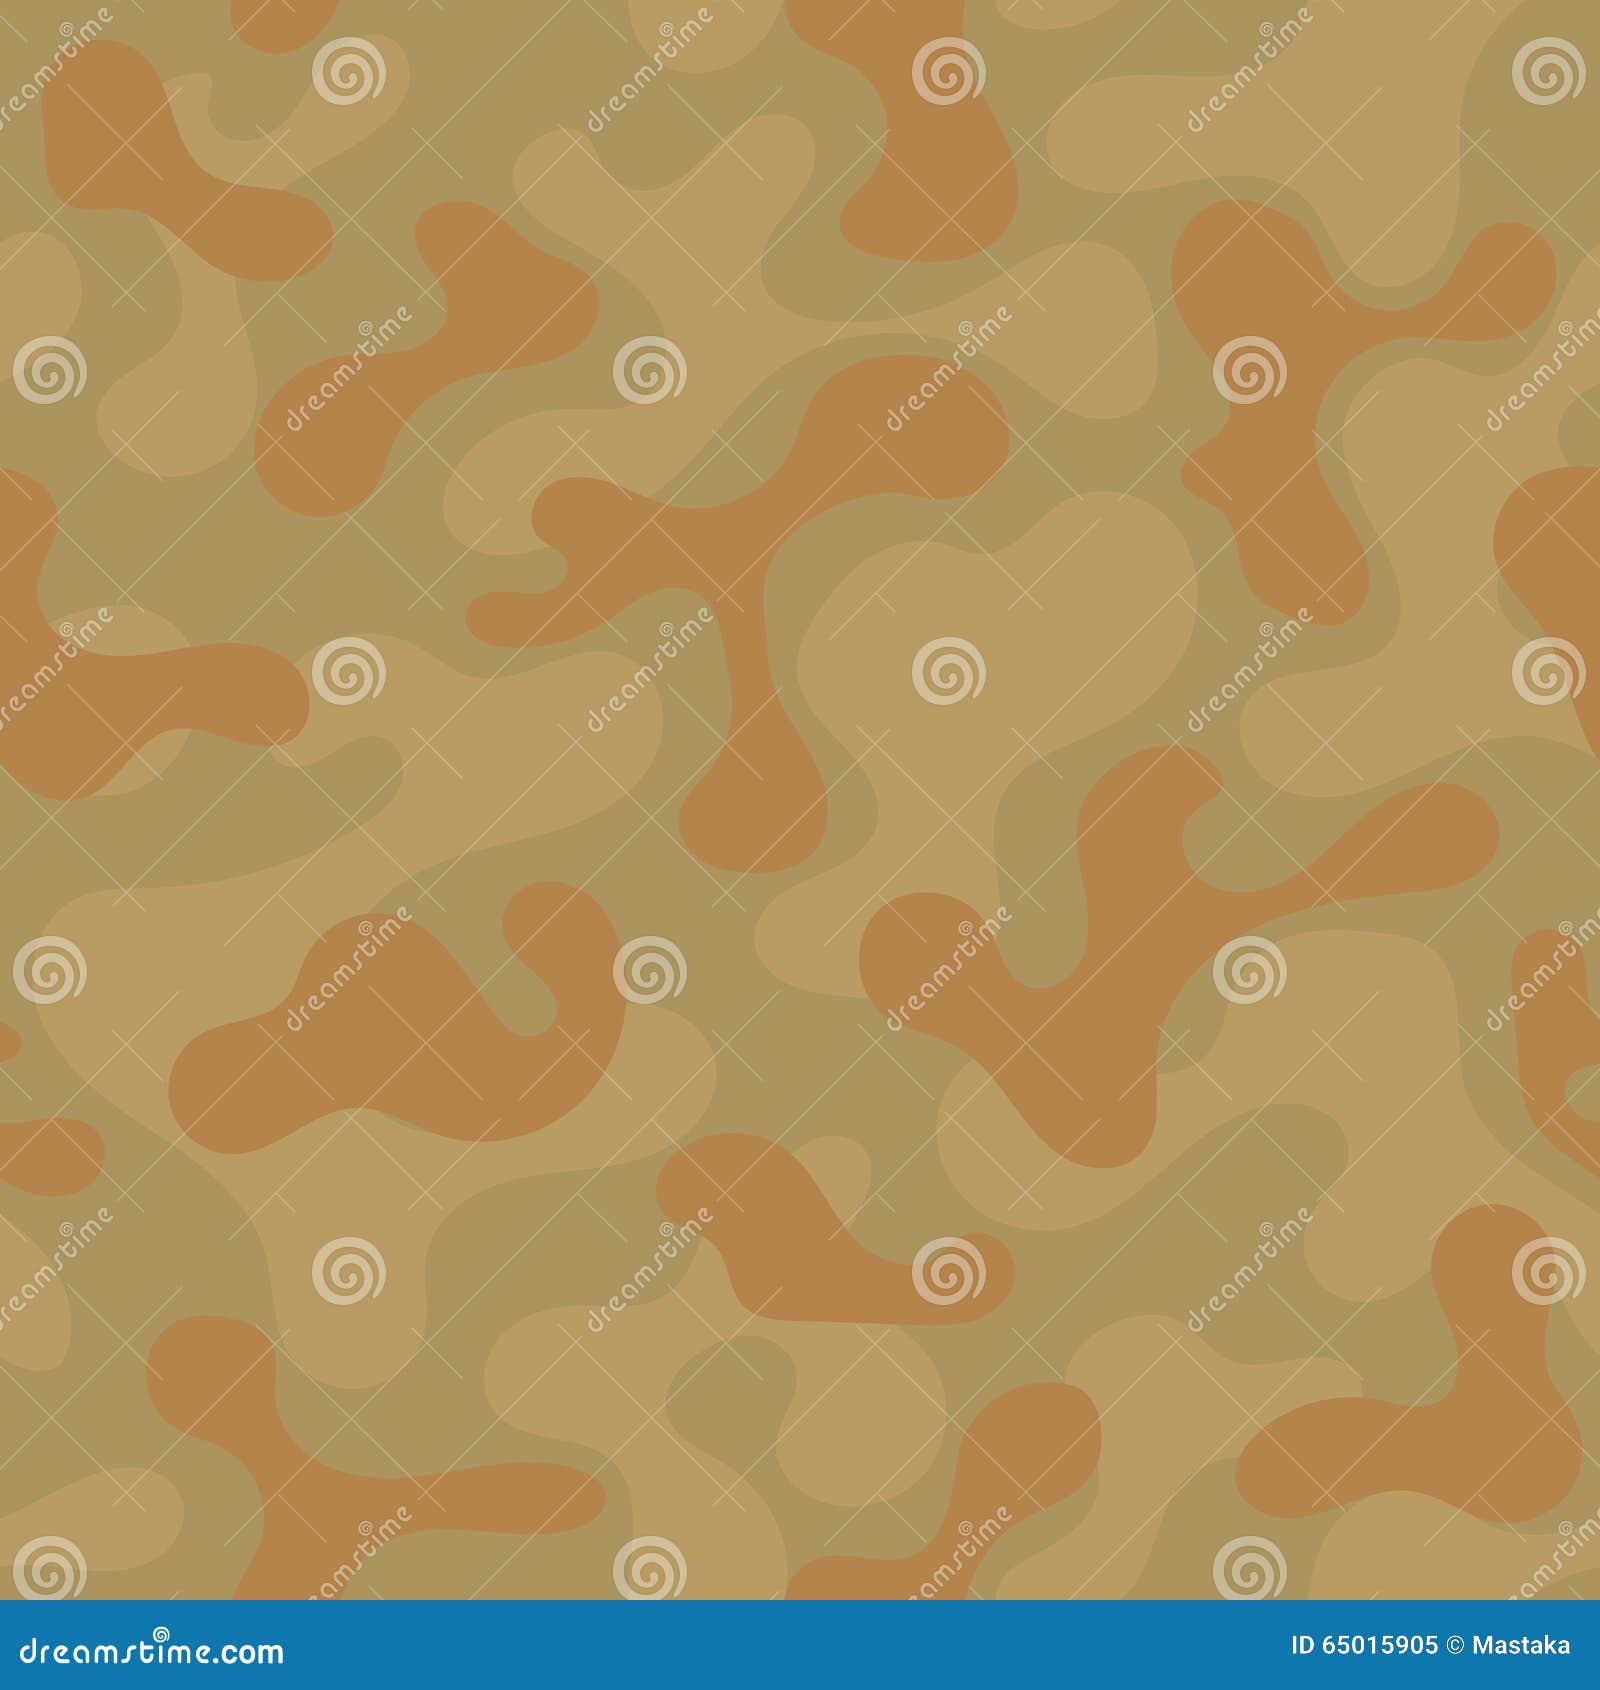 Military Camouflage Textile Pattern Stock Vector - Illustration of game ...